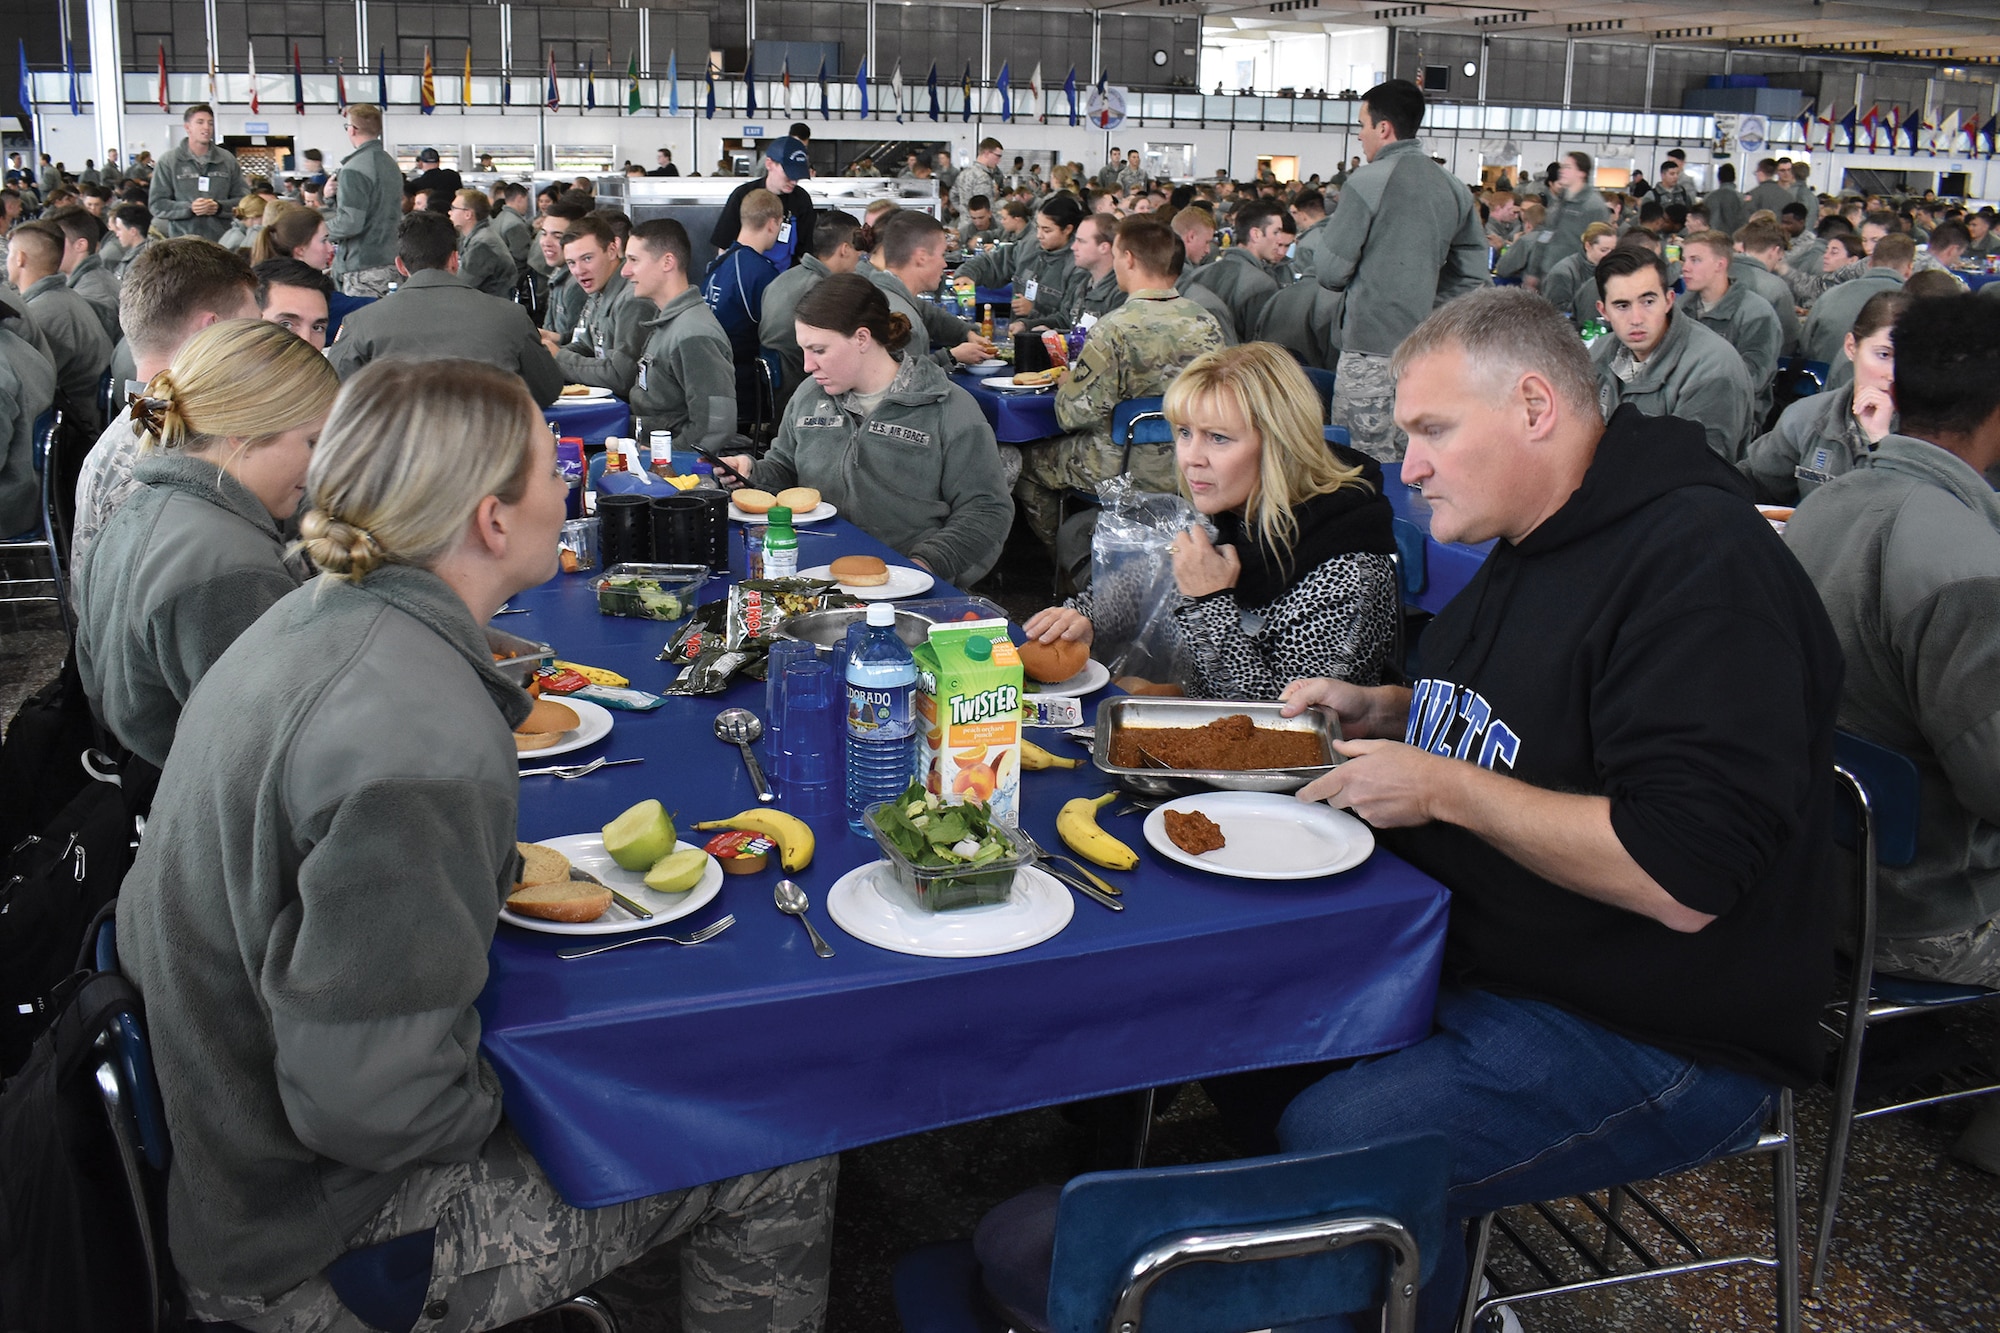 Greater Dayton area civic leaders eat lunch with cadets at the Air Force Academy, Colorado Springs, during a civic leader tour Oct. 10, 2019. Nineteen community leaders participated in the CLT Oct. 9-10, 2019.